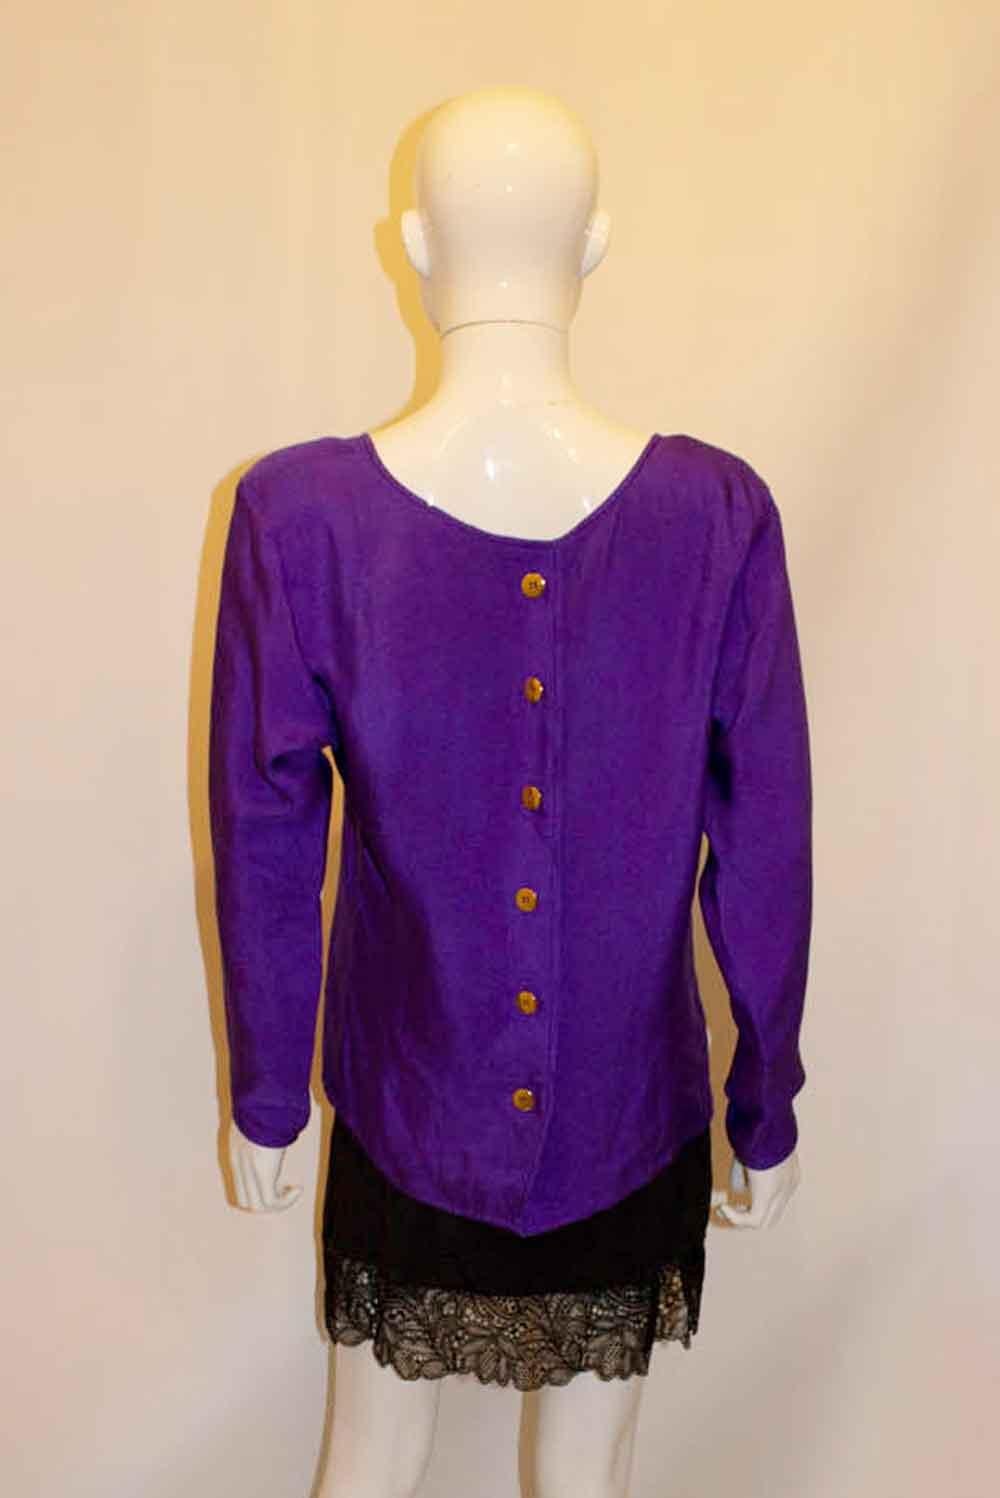 A stylish vintage silk top by Yves saint Laurent Rive Gauche. In a purple textured silk, the top has a round neckline and six button fastening at the back. Measurements: bust up to 39'',length 26'''